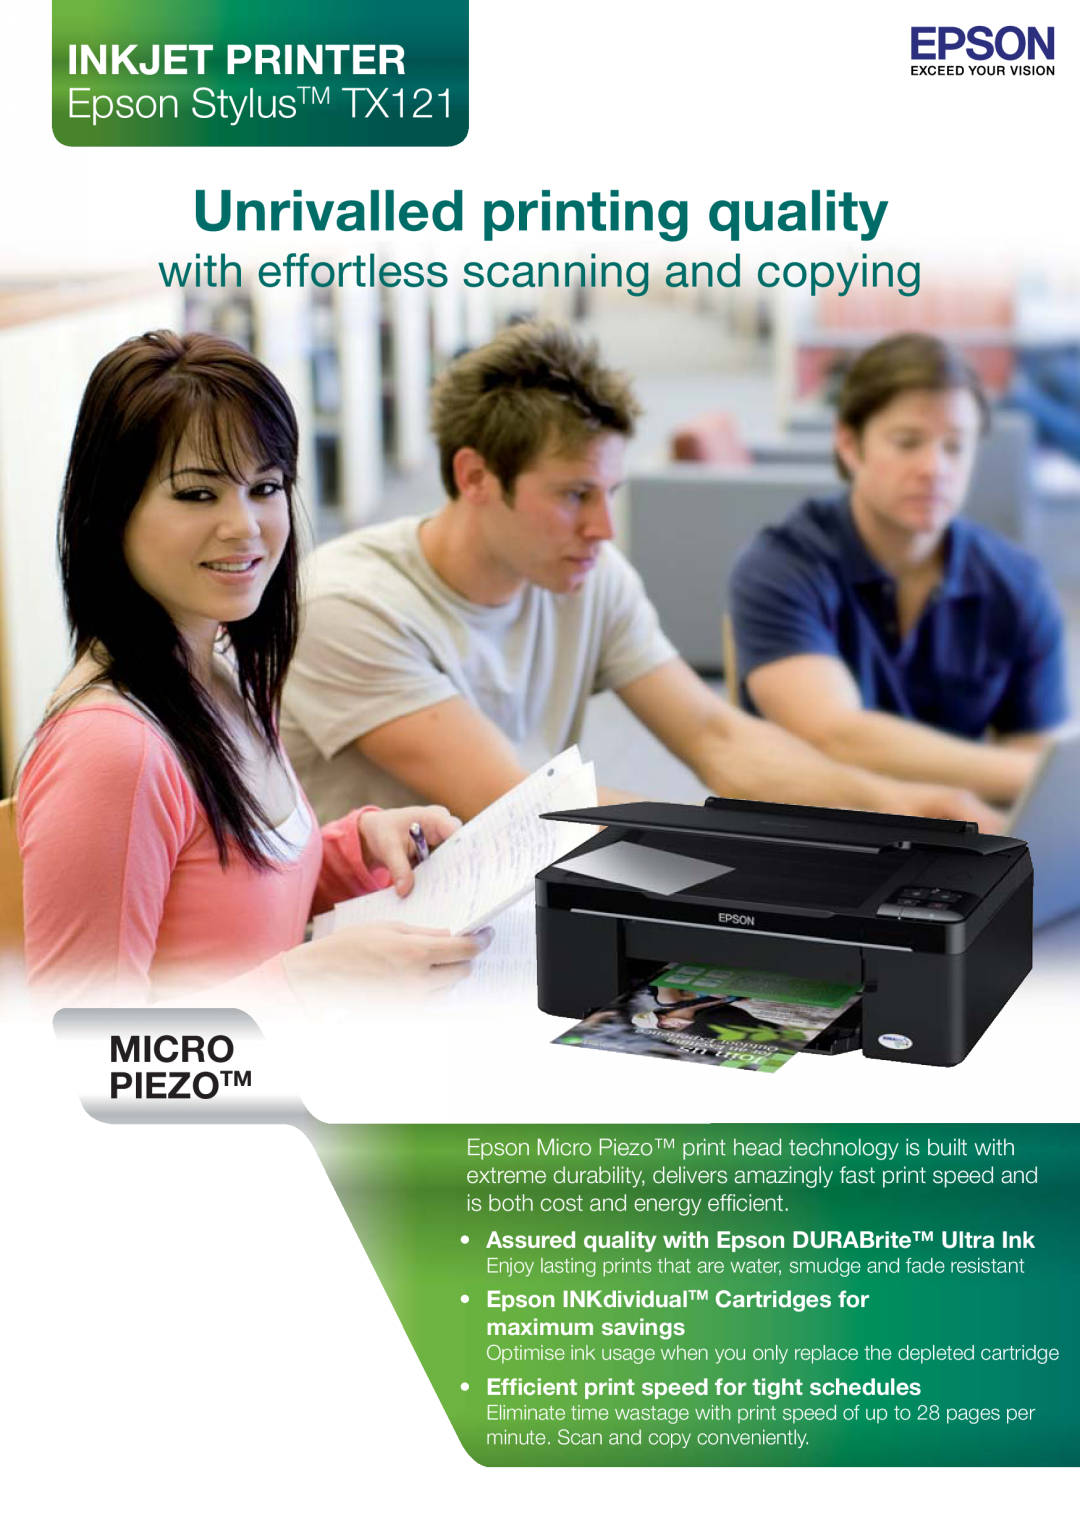 Epson TX121 manual Enjoy lasting prints that are water, smudge and fade resistant, Unrivalled printing quality 